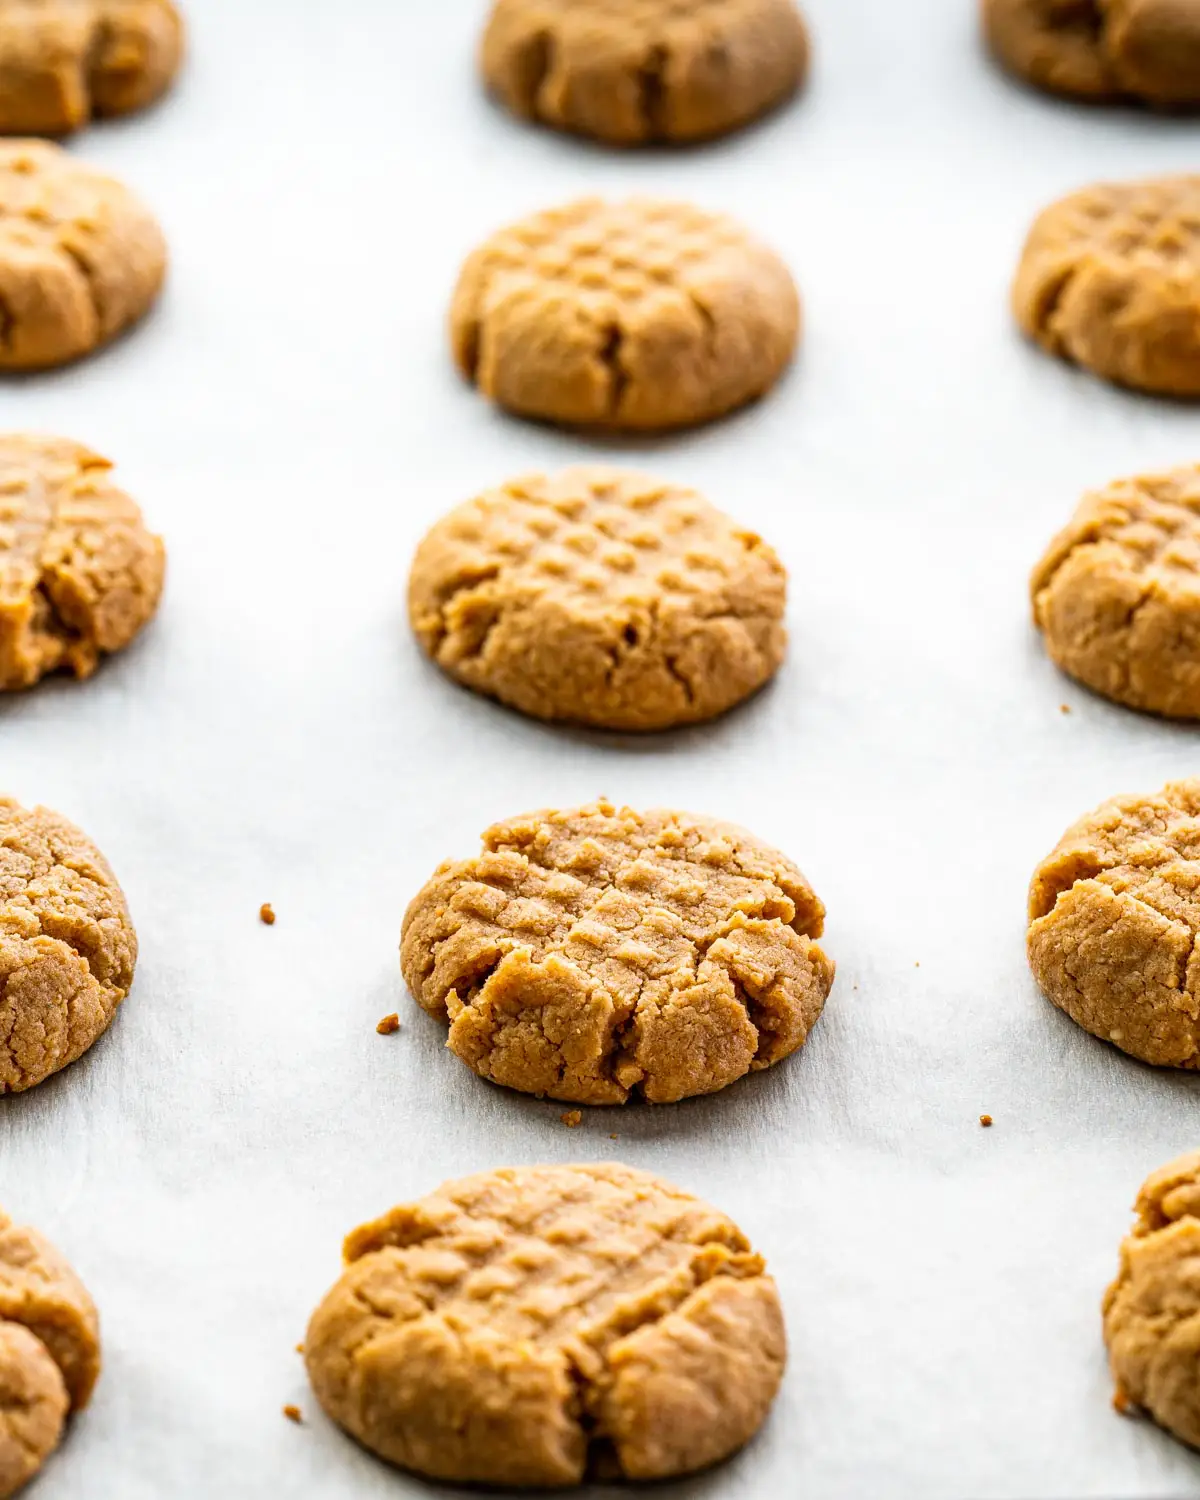 peanut butter cookies fresh out of the oven on a baking sheet.